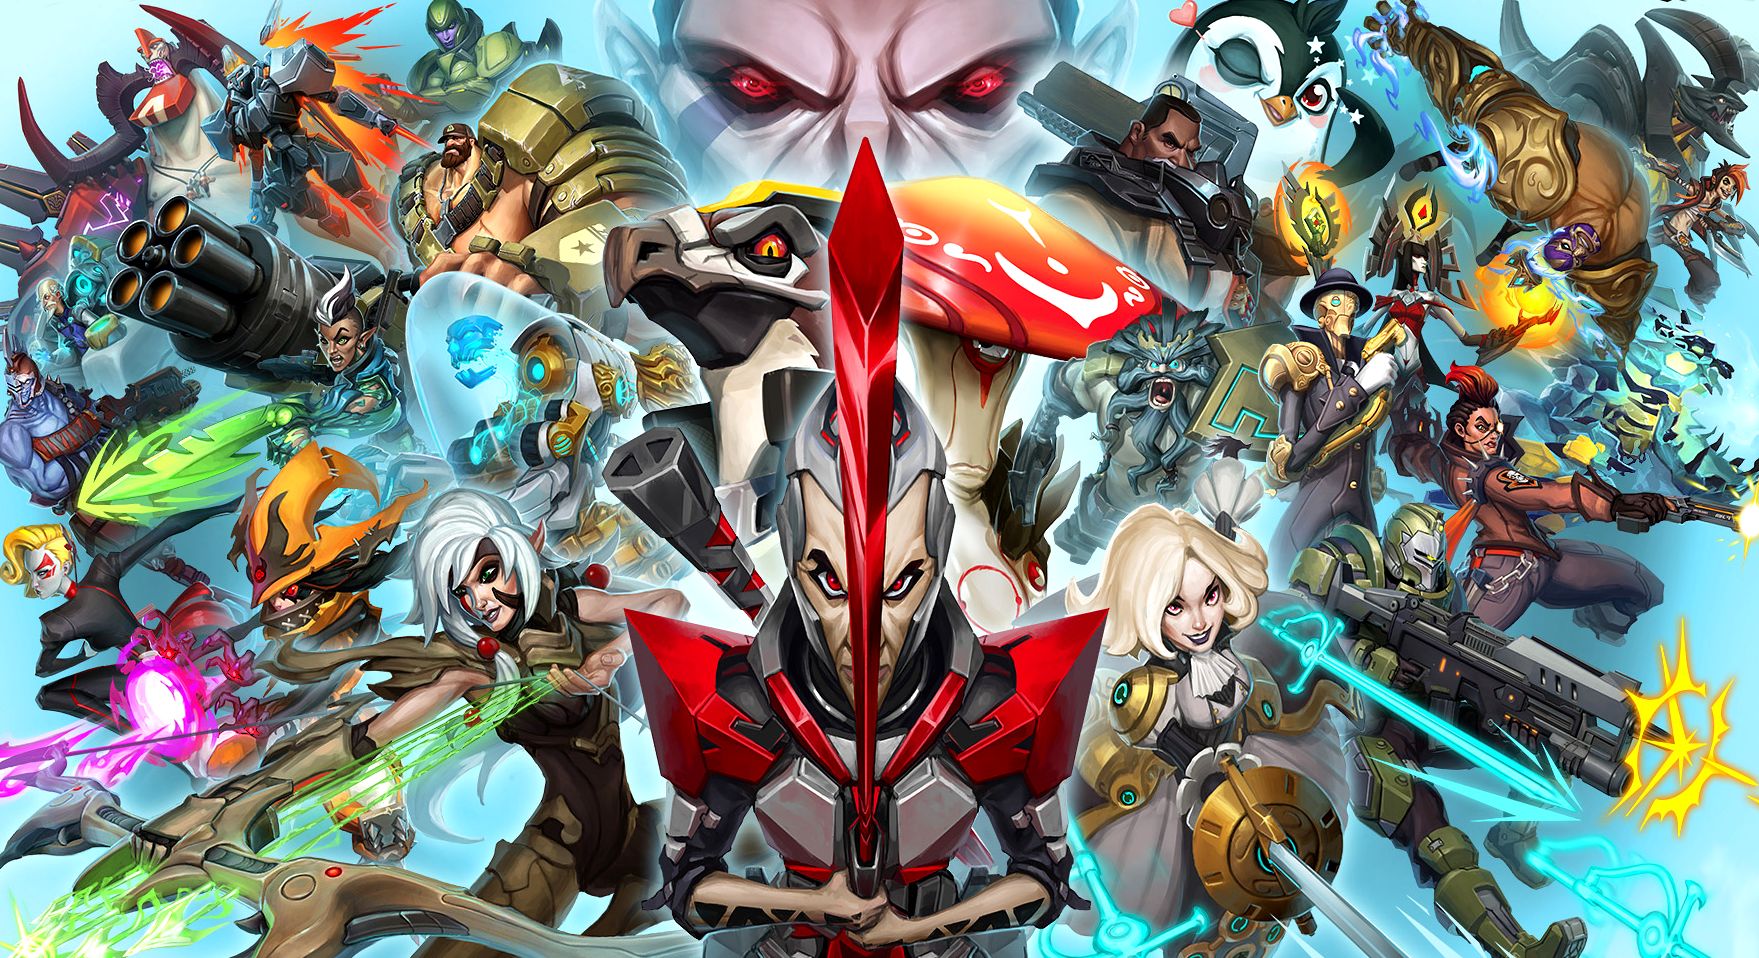 Image for Reminder: Battleborn will be completely unplayable in a few weeks